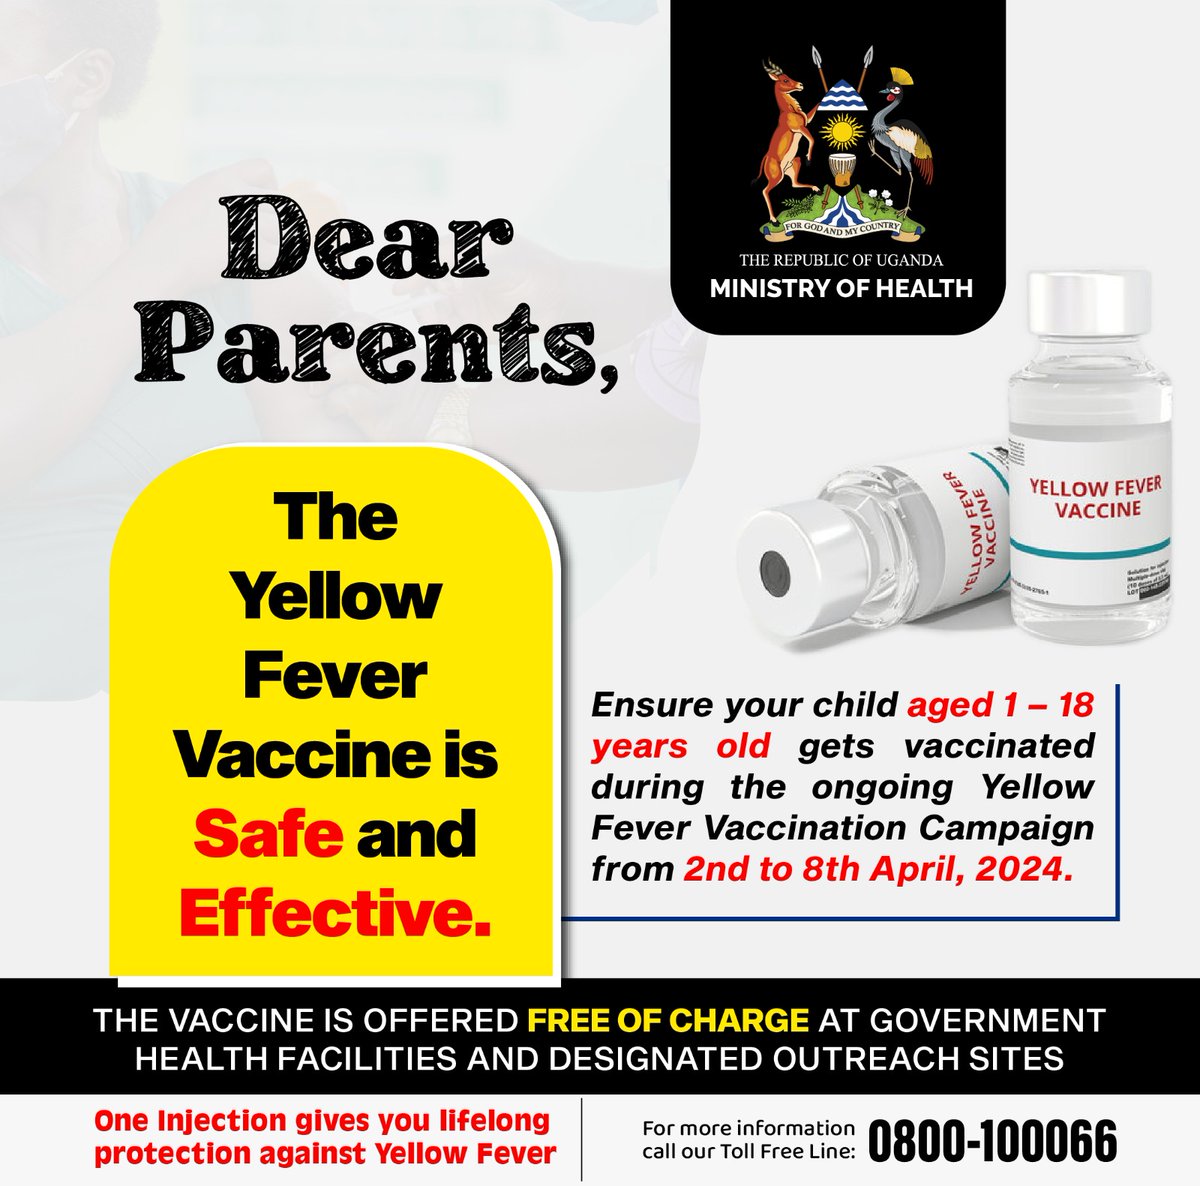 Dear Parents, The Yellow Fever Vaccine is Safe, Effective and offered FREE of charge at Government Health Facilities, Designated Outreach Sites including schools. Please ensure that your child gets vaccinated so he/she is protected from Yellow Fever for life. #YellowFeverFreeUG